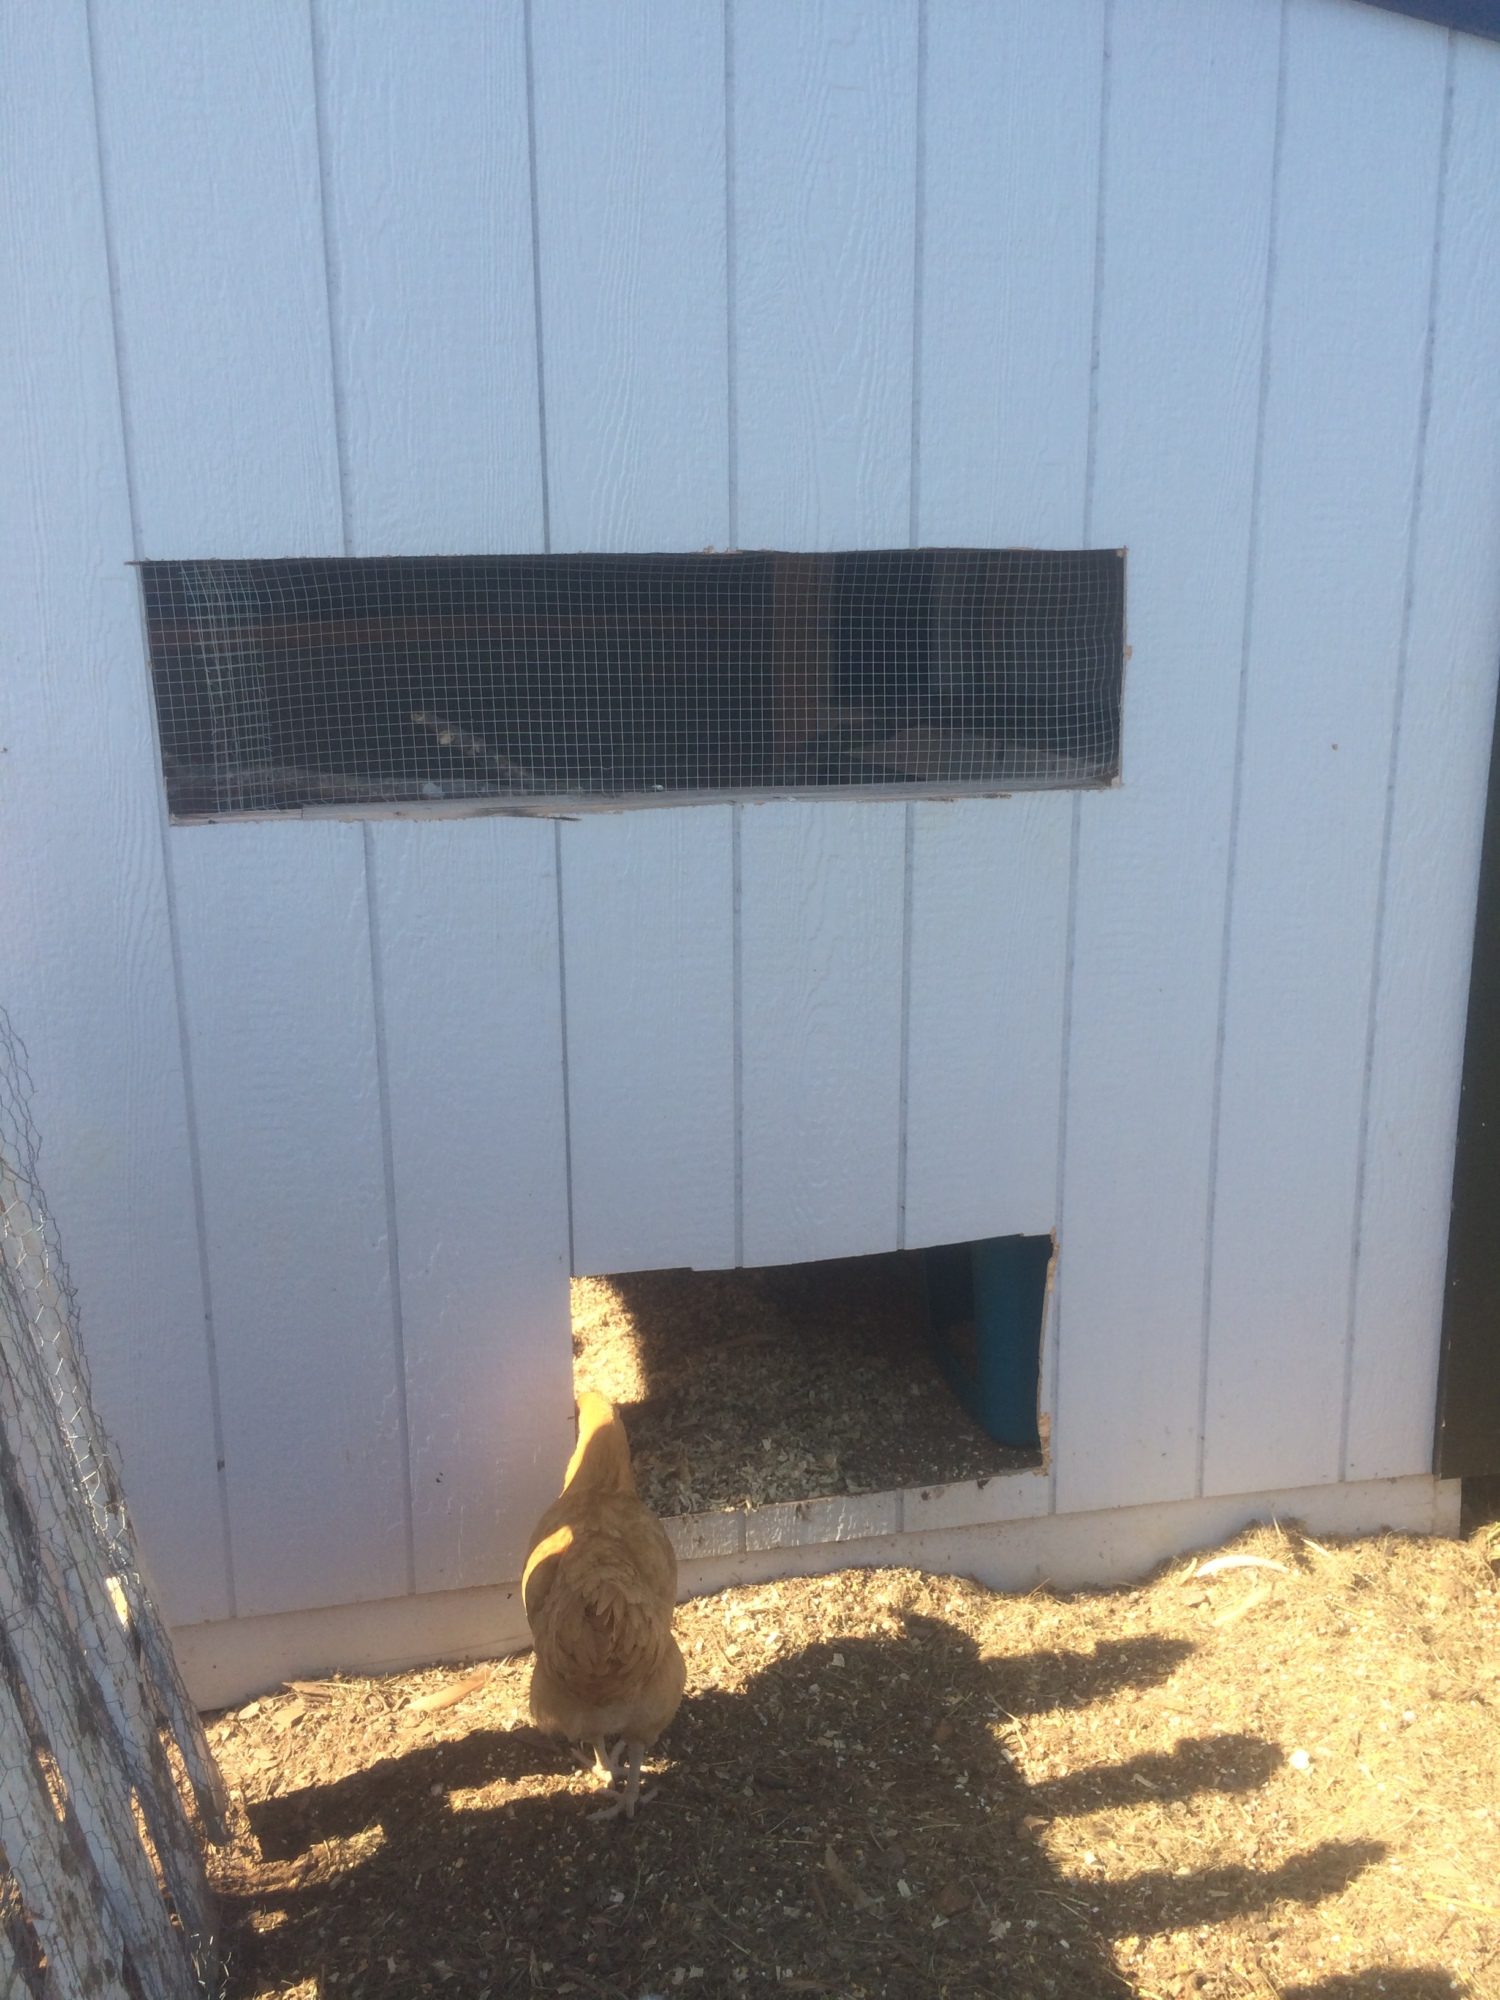 We cut an exit door in the side of the coop that goes out to their run.